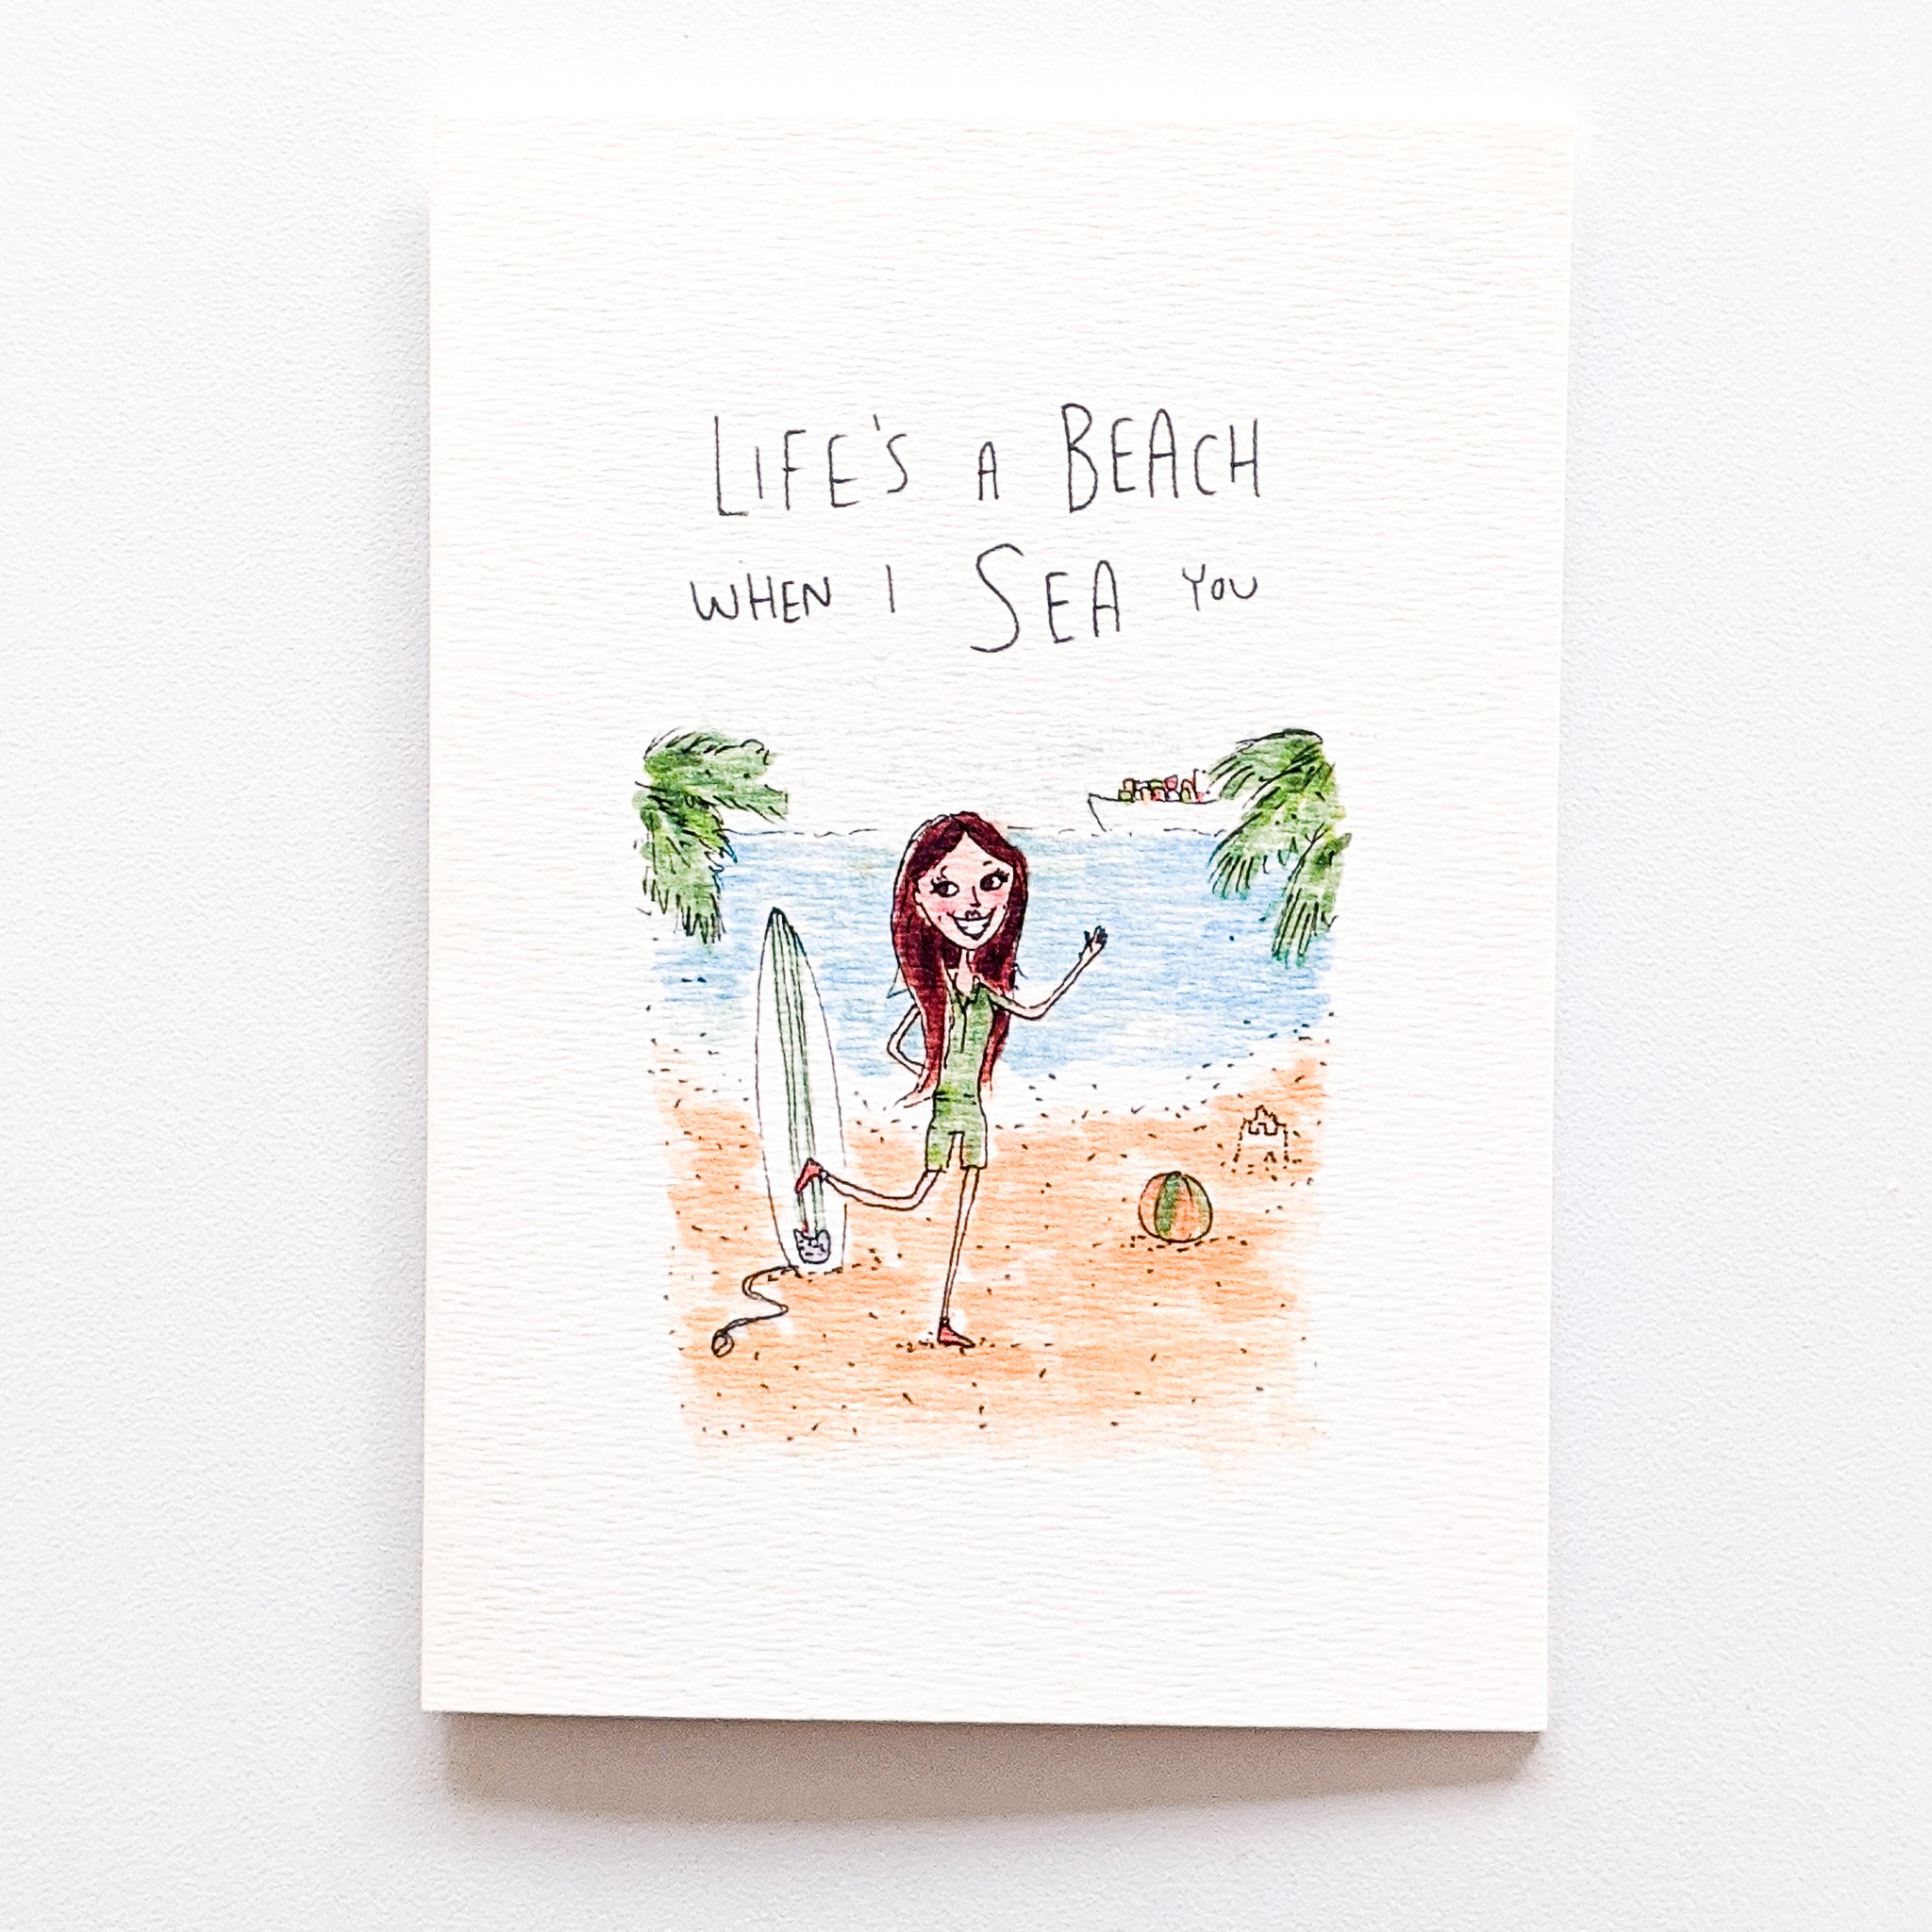 Life Is A Beach When I Sea You - Well Drawn